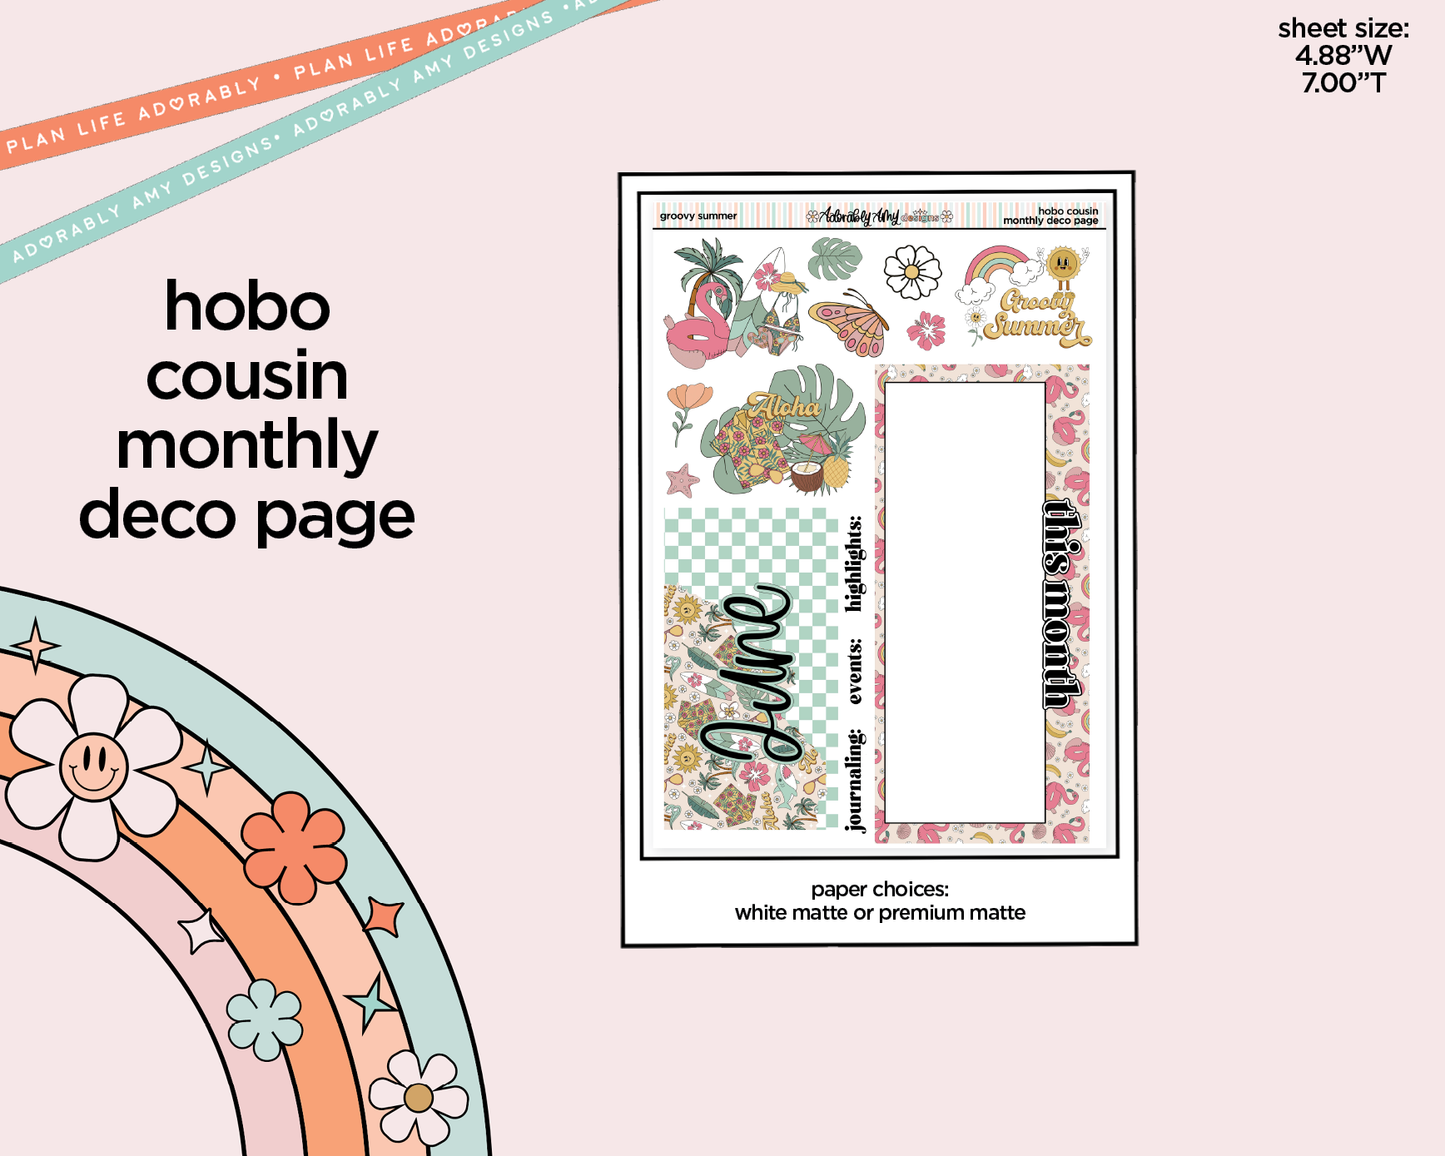 Hobonichi Cousin Monthly Pick Your Month Groovy Summer Planner Sticker Kit for Hobo Cousin or Similar Planners